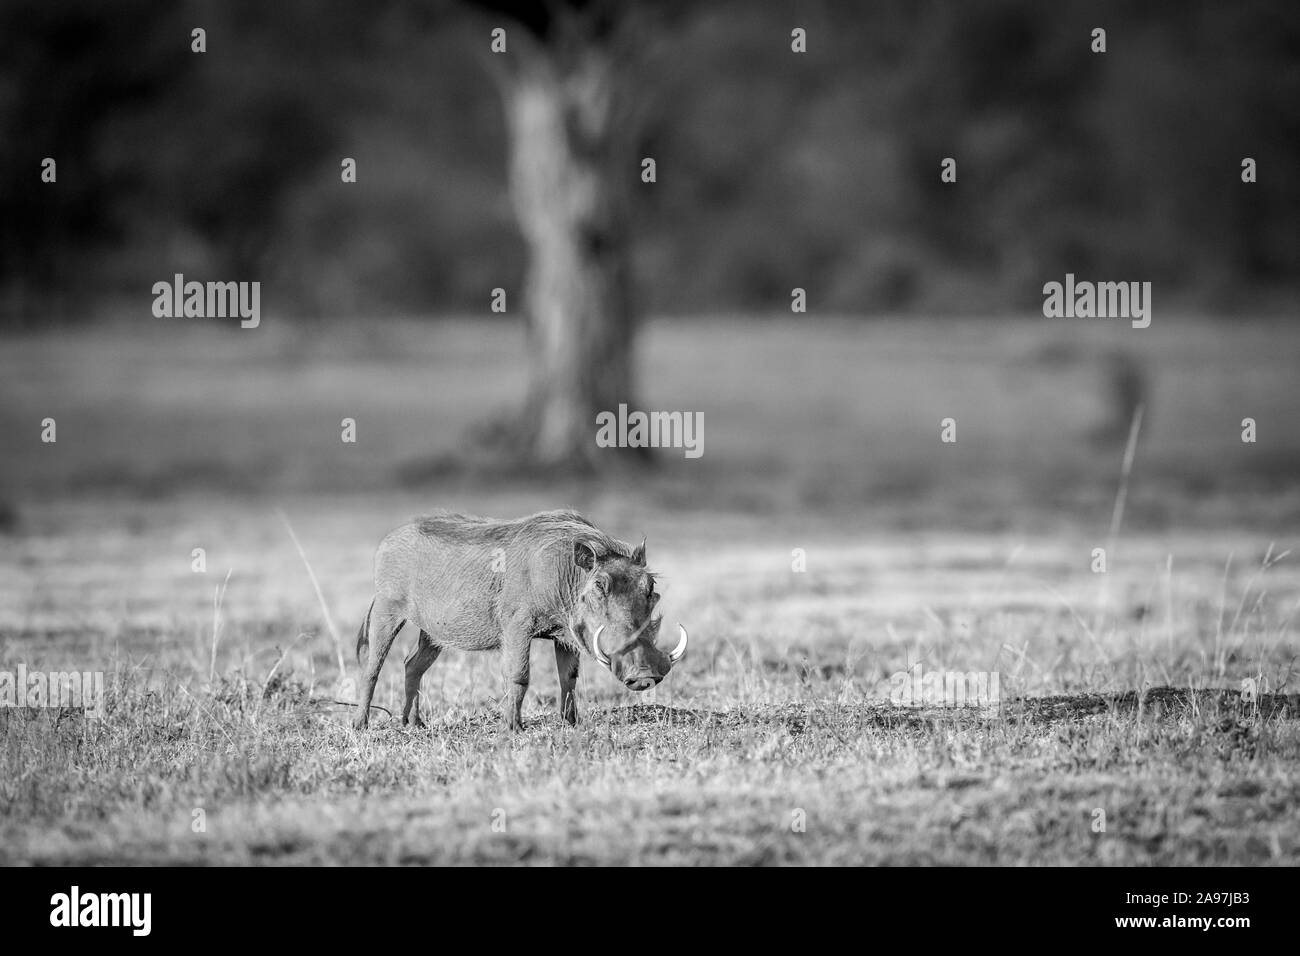 Warthog standing in the grass in black and white in the Welgevonden game reserve, South Africa. Stock Photo